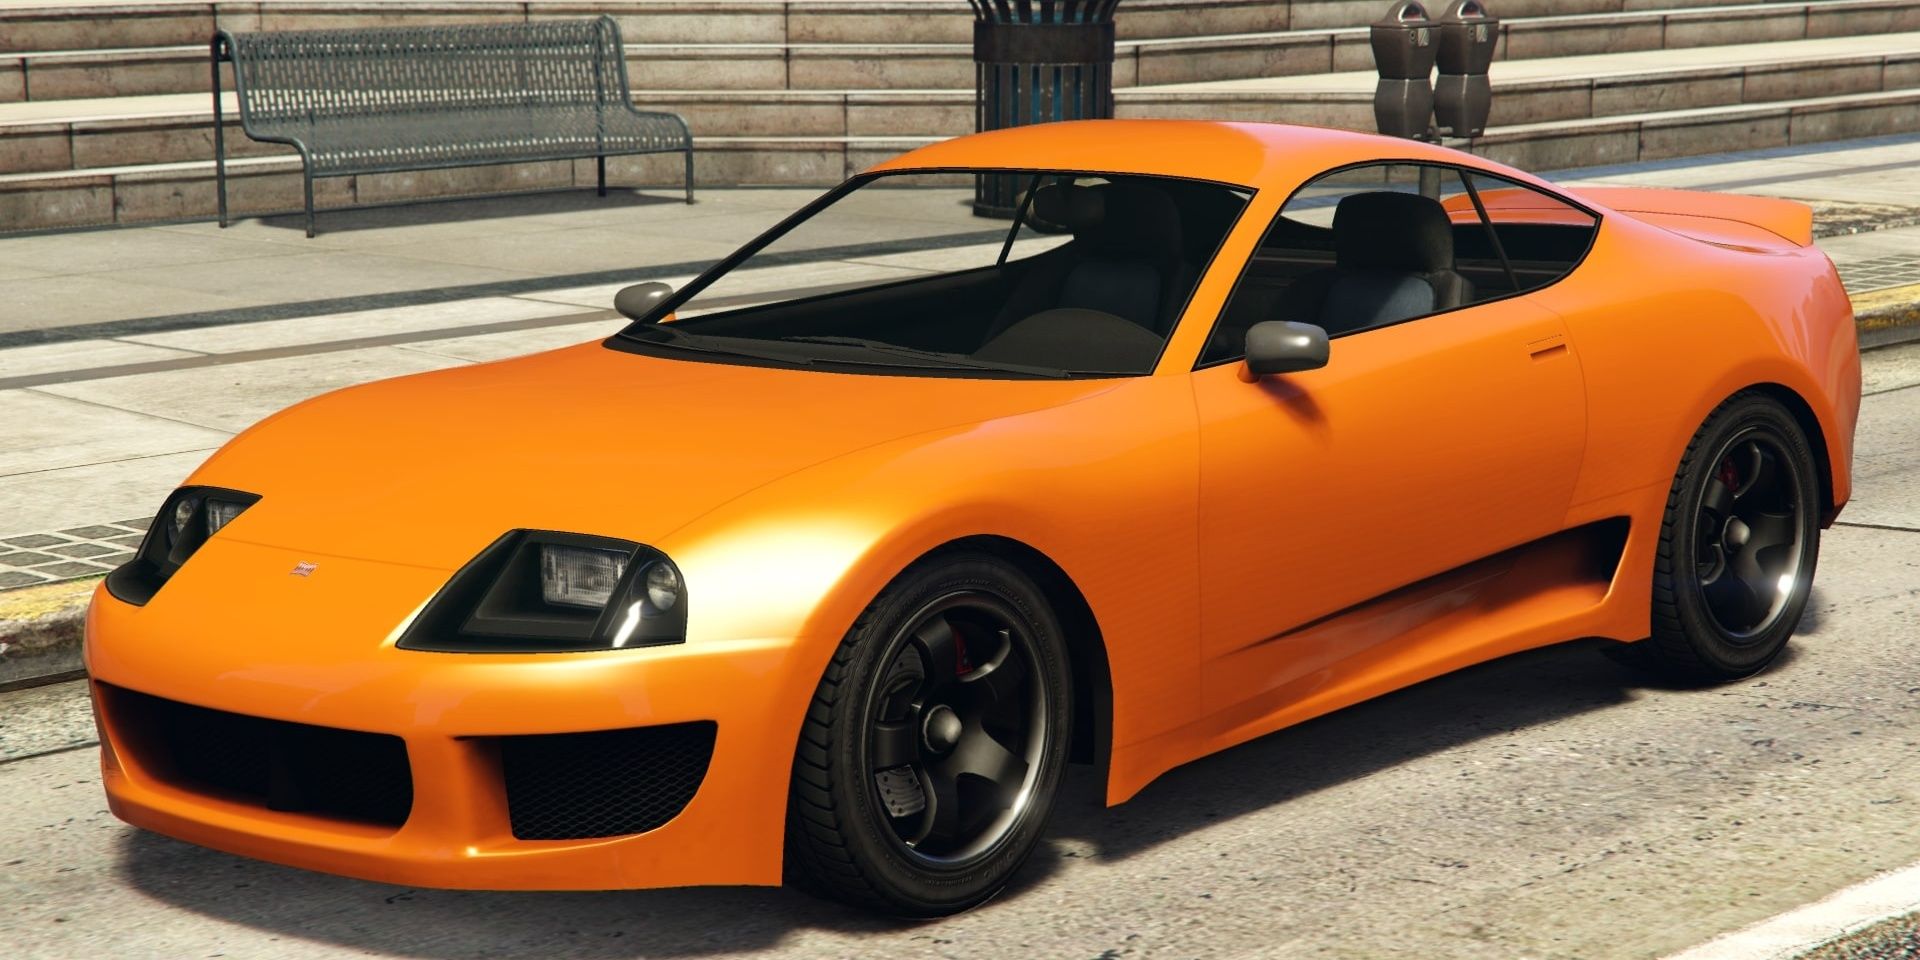 GTA 5 Jester Classic car parked